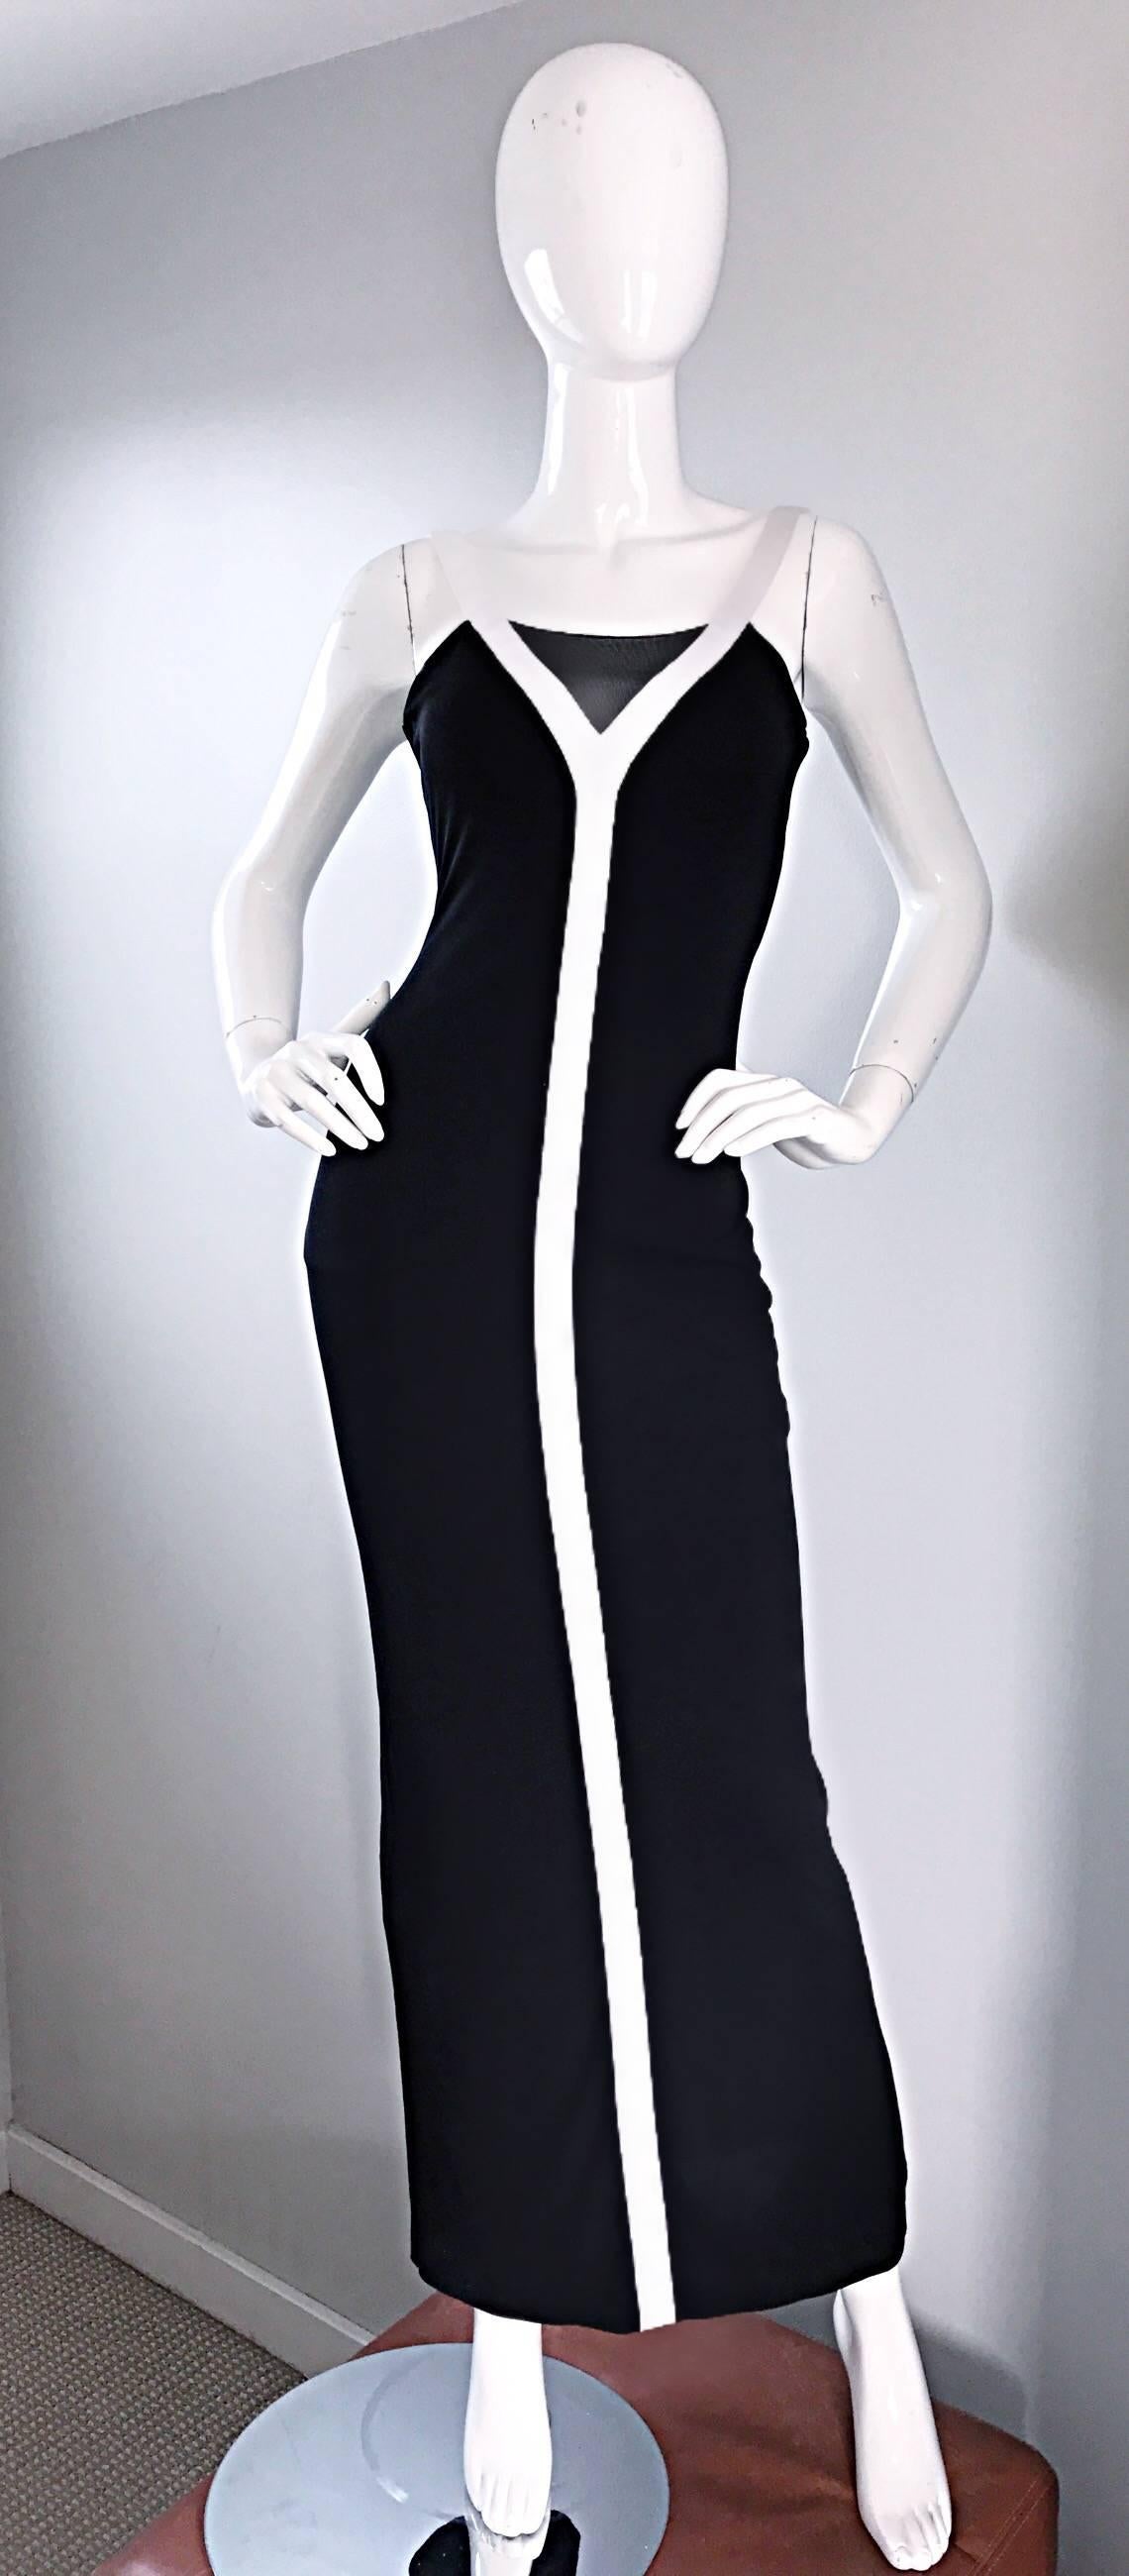 Dolce & Gabbana 1990s Vintage Black and White Iconic Jersey Dress Gown Dress For Sale 4